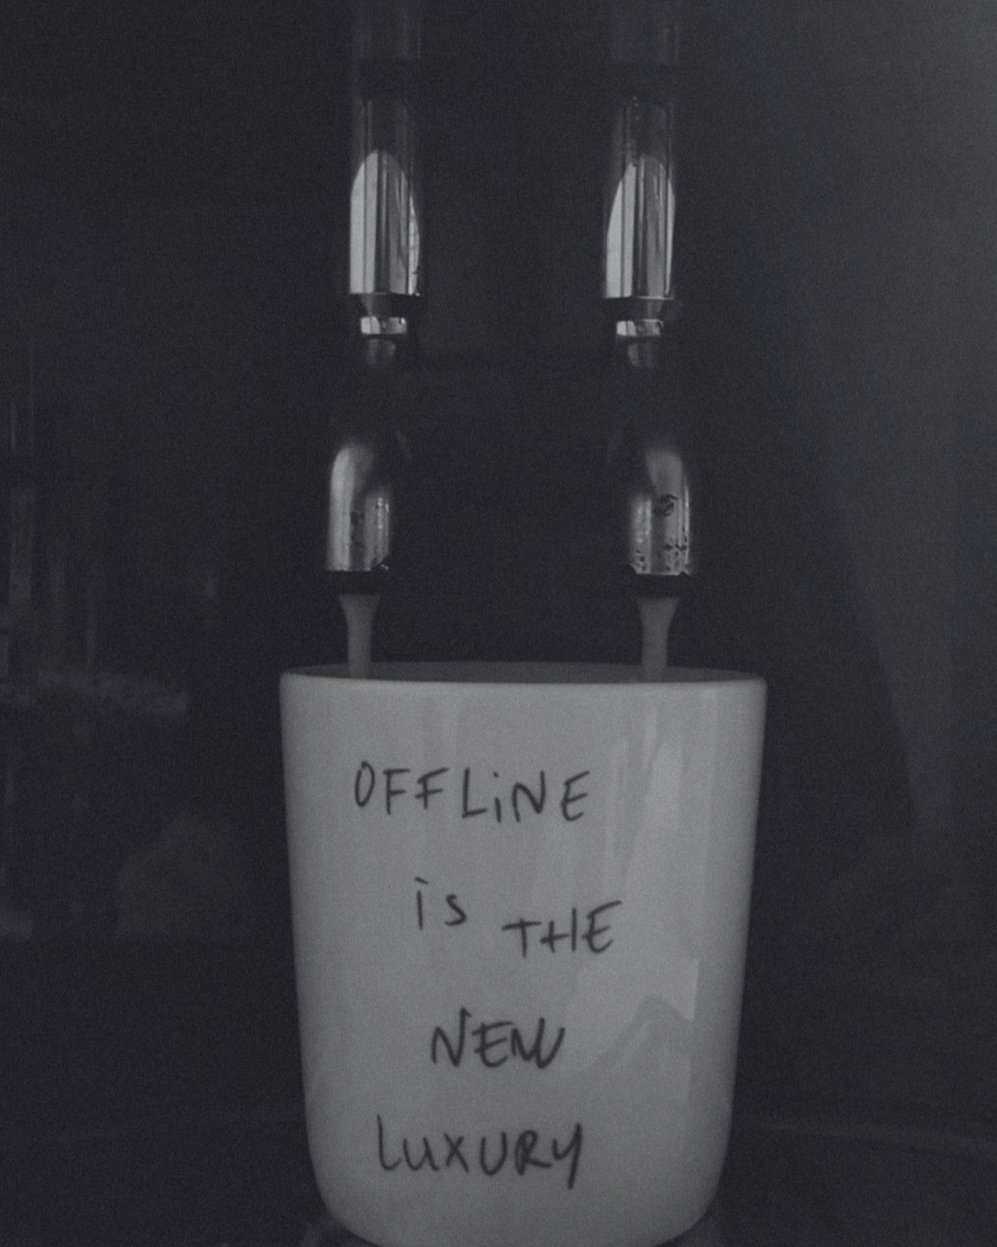 offline is the new luxury. in today's digital world, moments of genuine, personal interaction + offline experiences are becoming increasingly rare and therefore, highly valued.

let us help with unique strategy that goes beyond digital platforms. cre